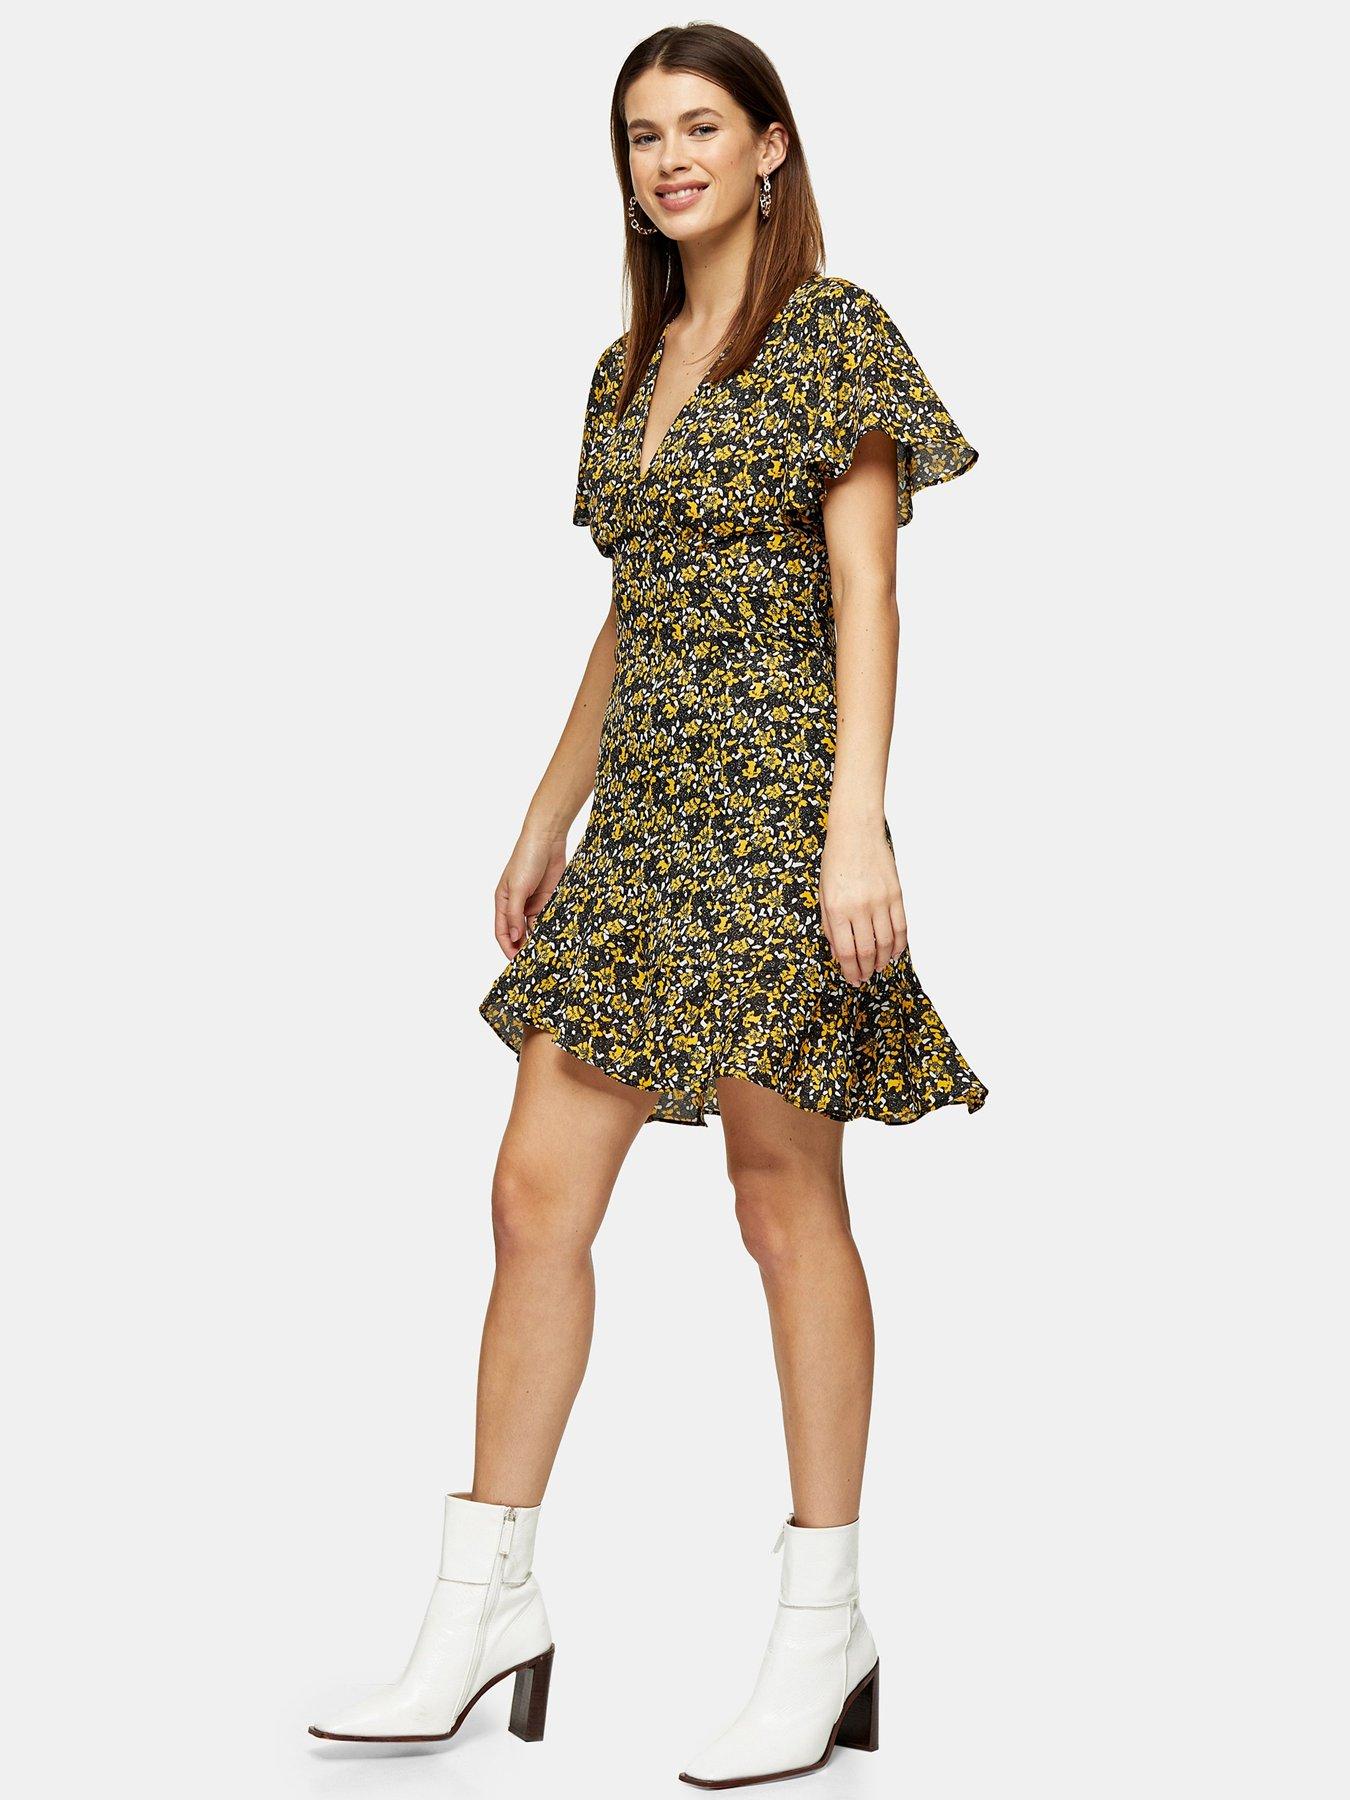 topshop clearance dresses